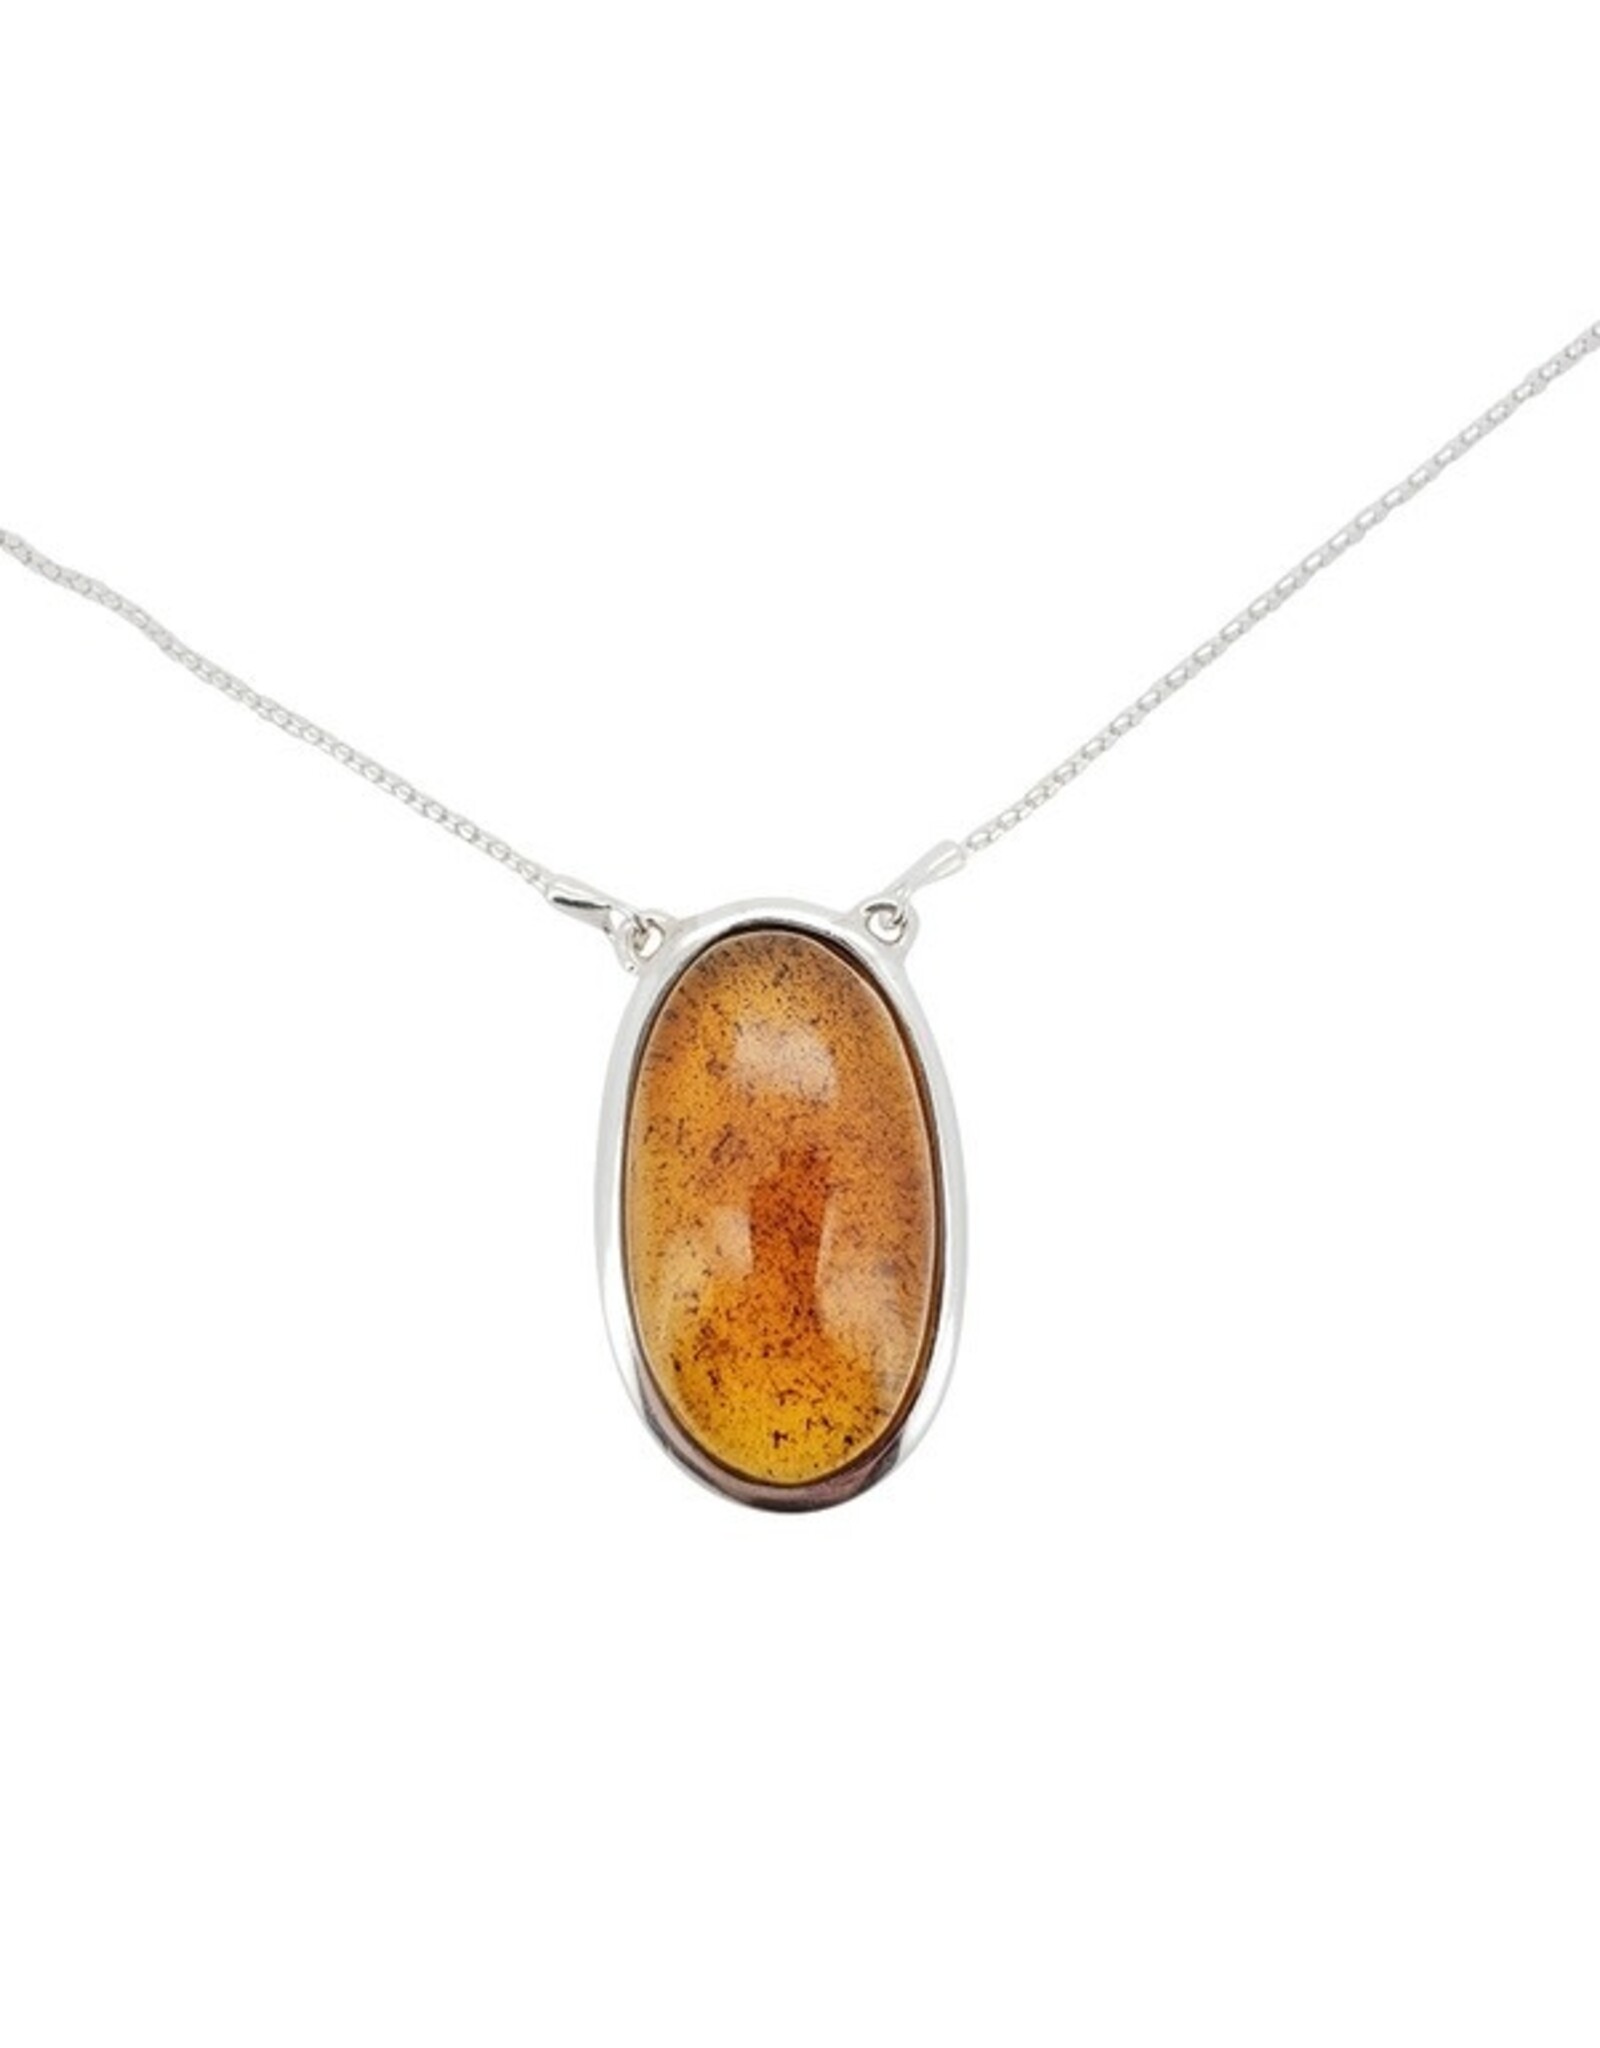 Natural Baltic Amber Pendant in 925 Sterling Silver Necklace